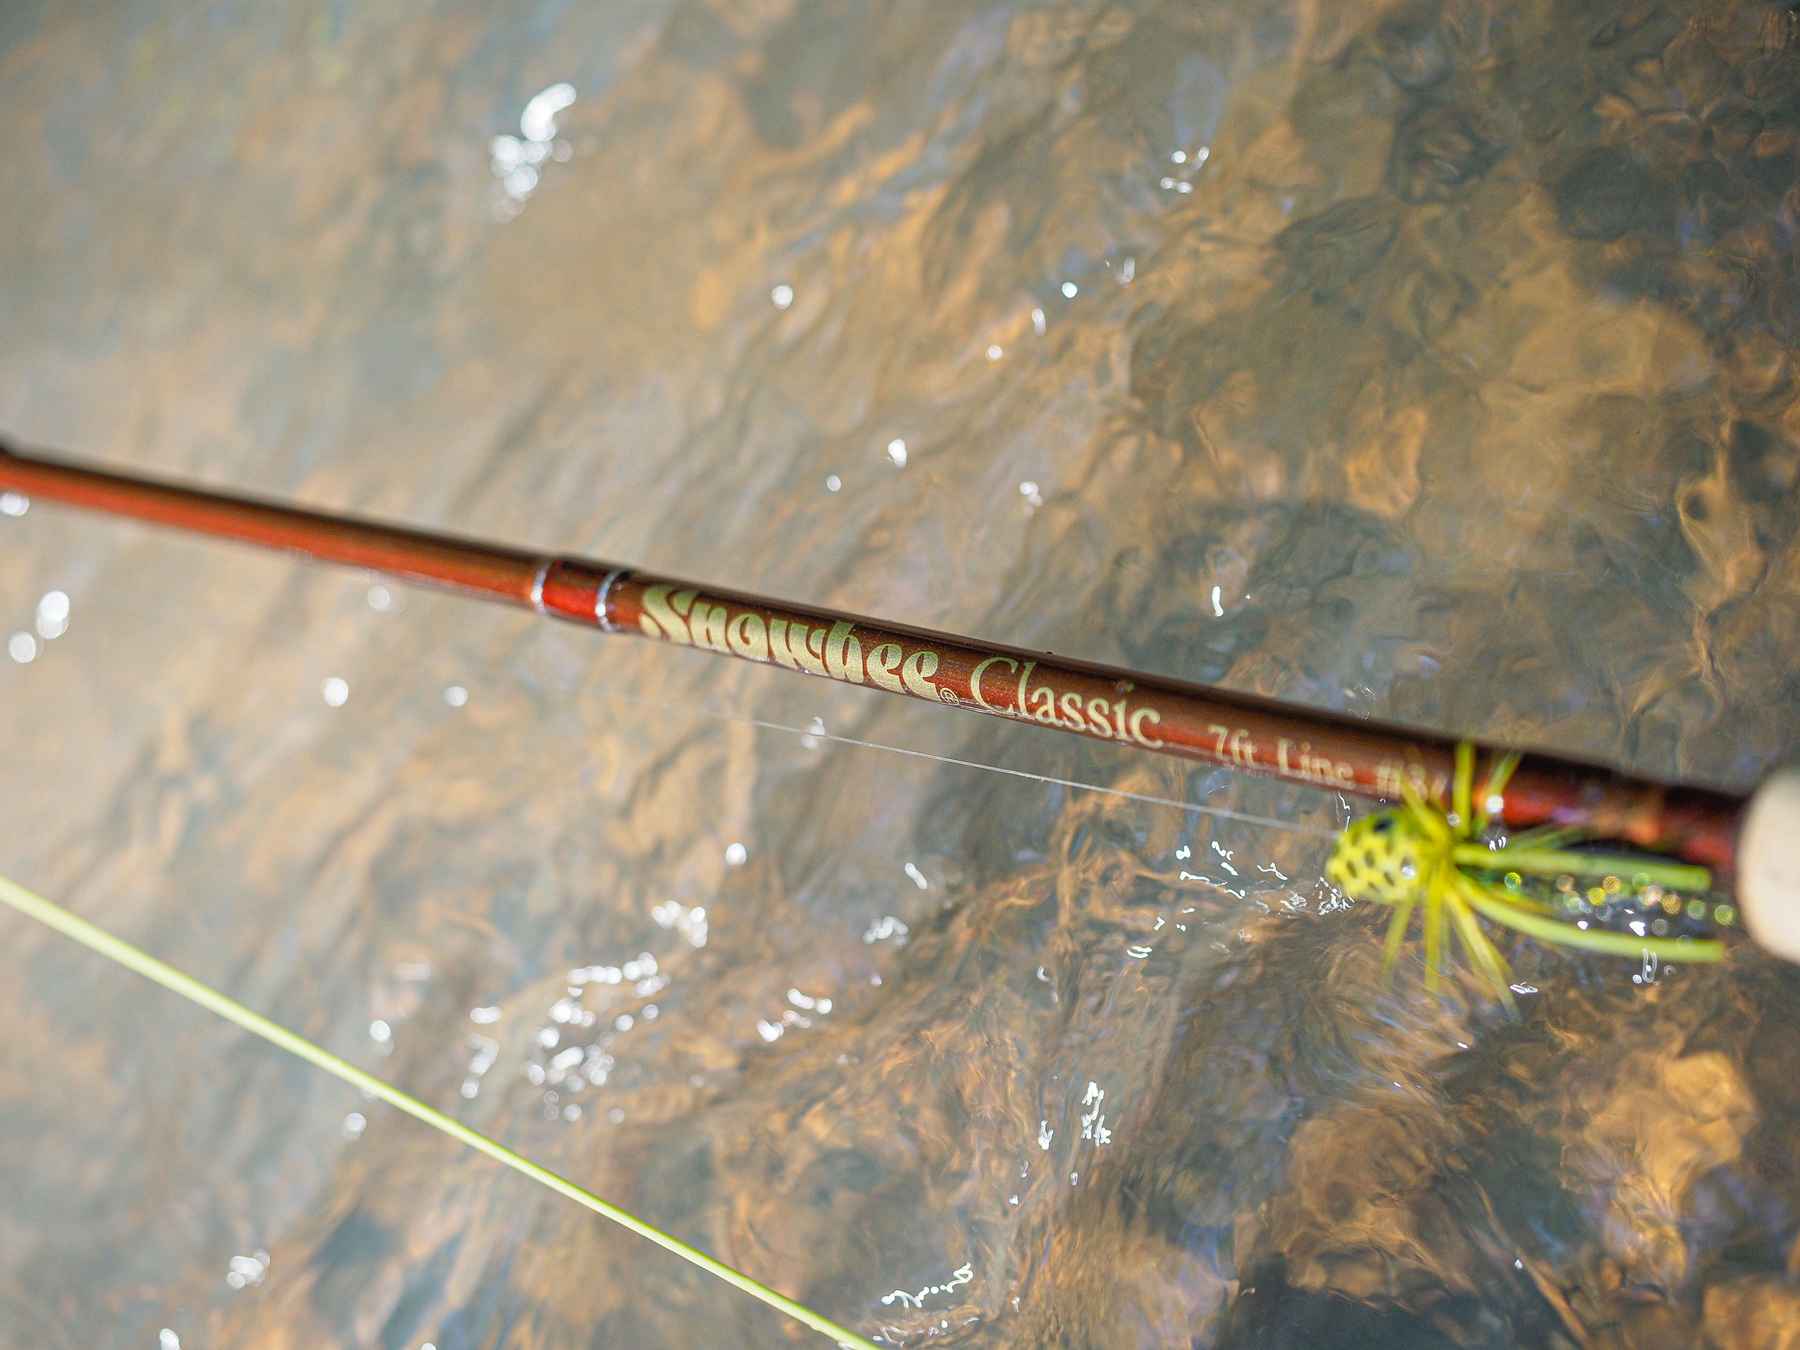 Snowbee Classic Combo Trout Fishing Kit - Fly Fishing Outfits